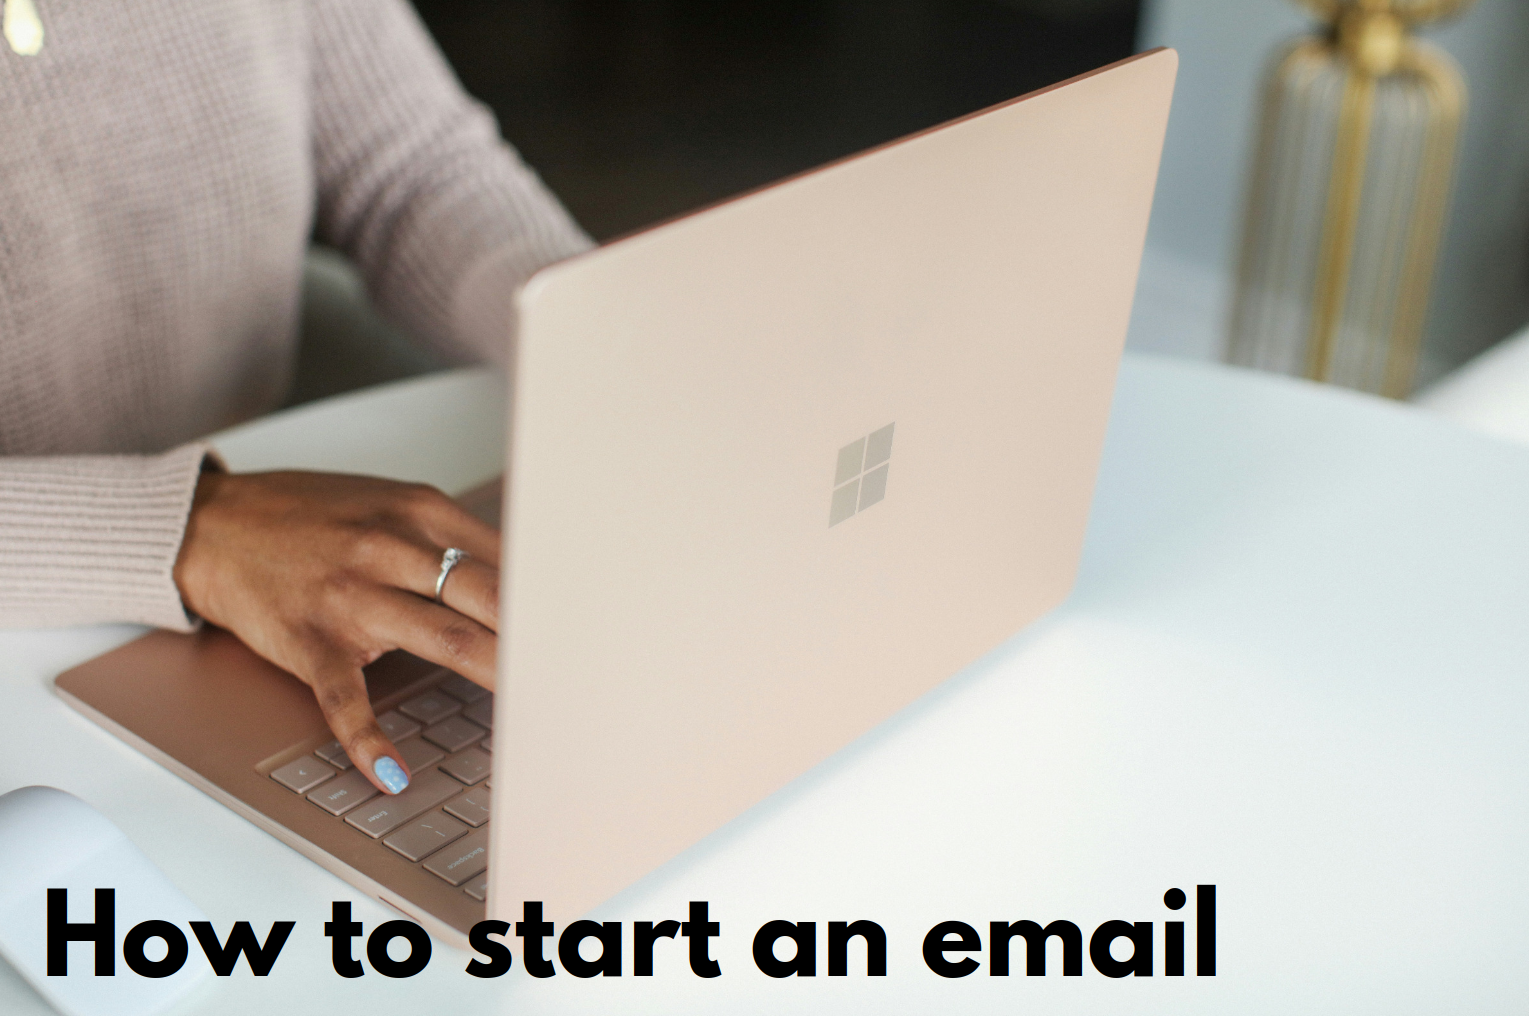 Woman typing on a laptop: How to start an email